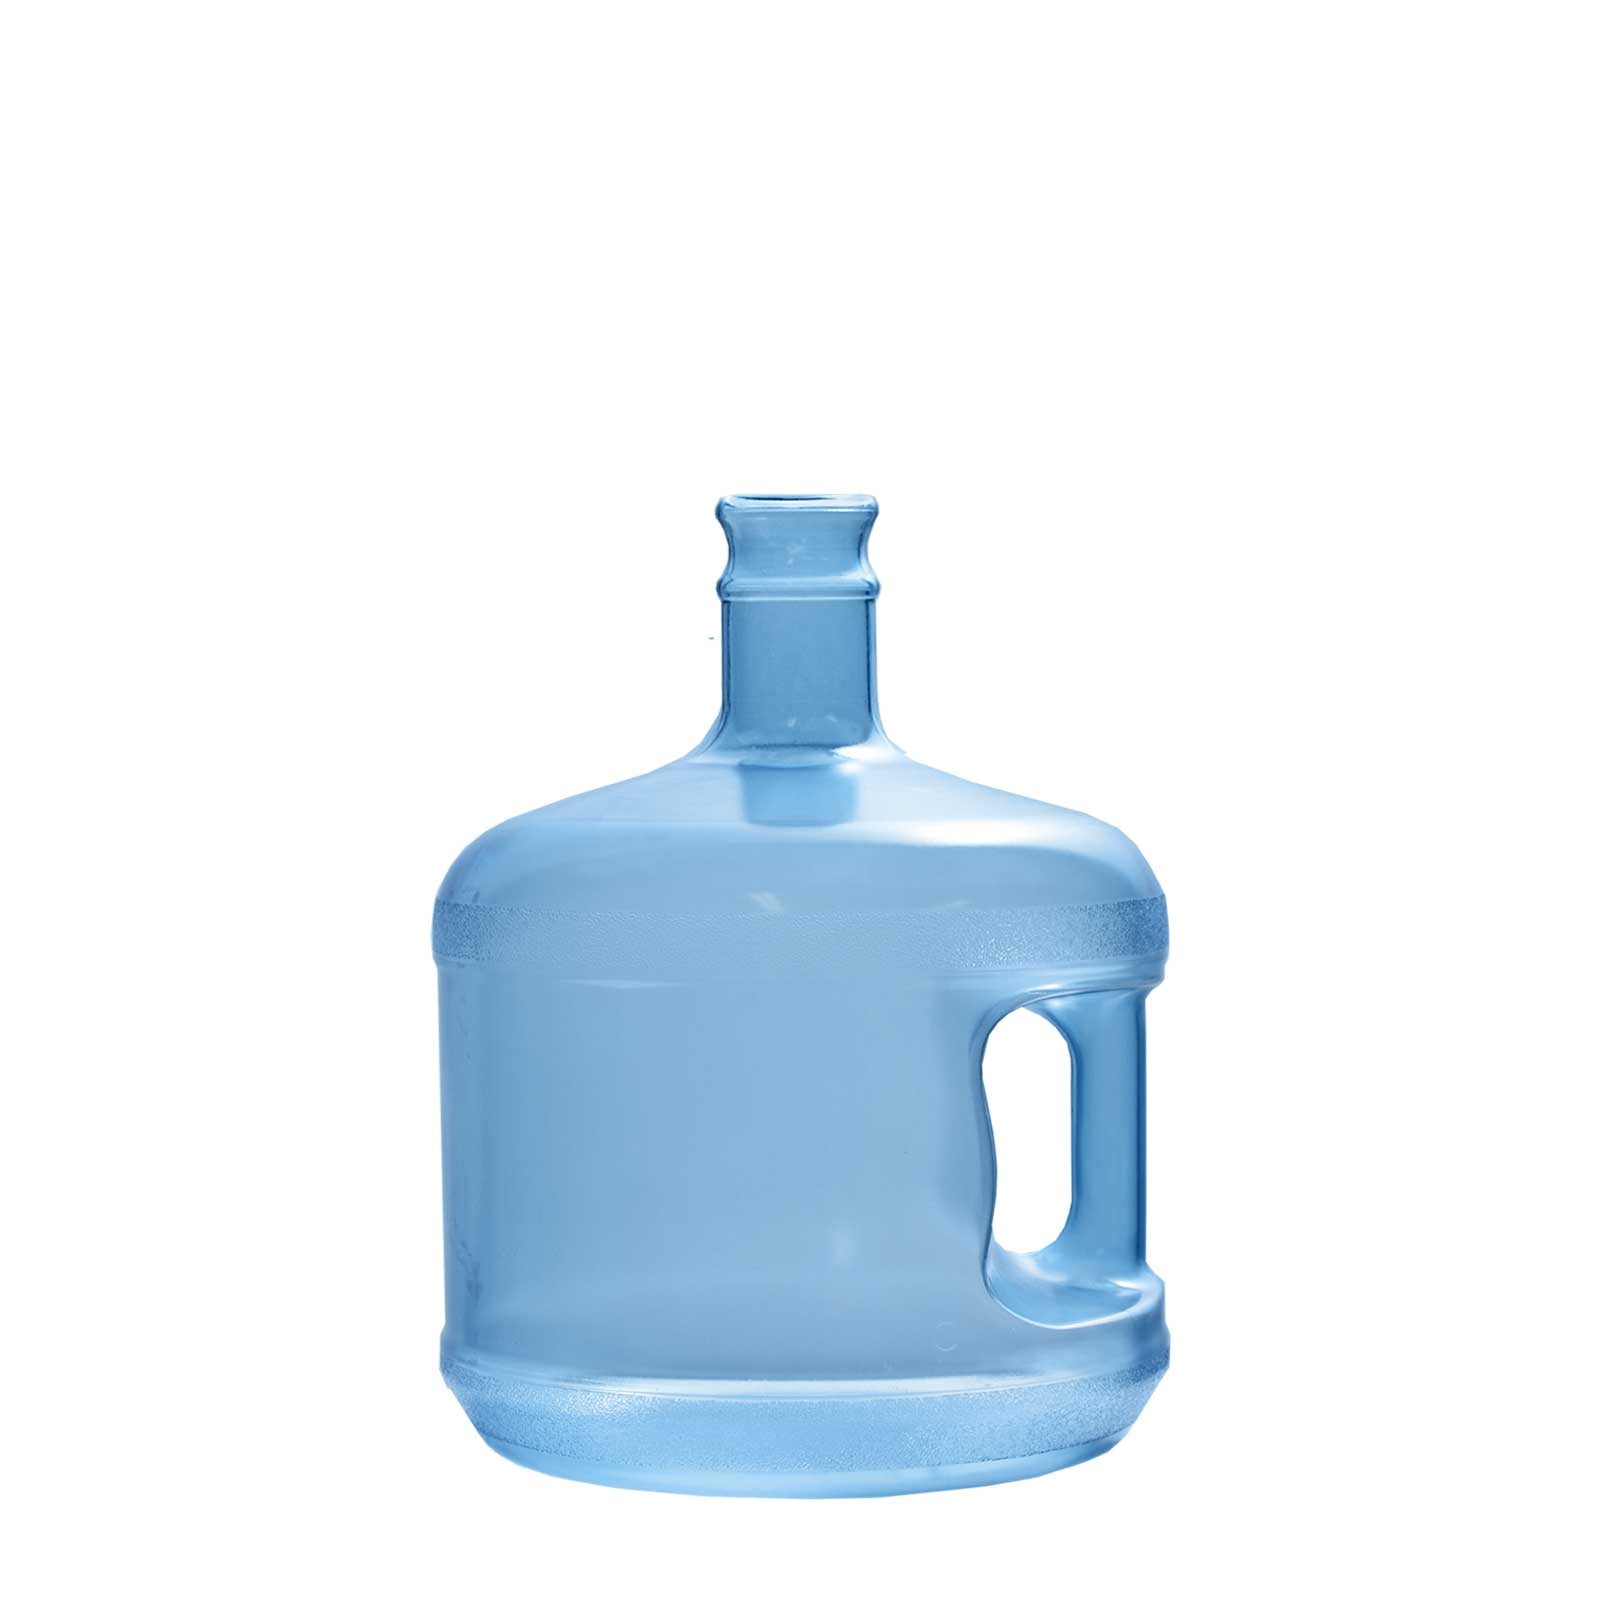 5 Gallon Plastic Water Bottle Drinking Polycarbonate Big Cap Jug Container USA 